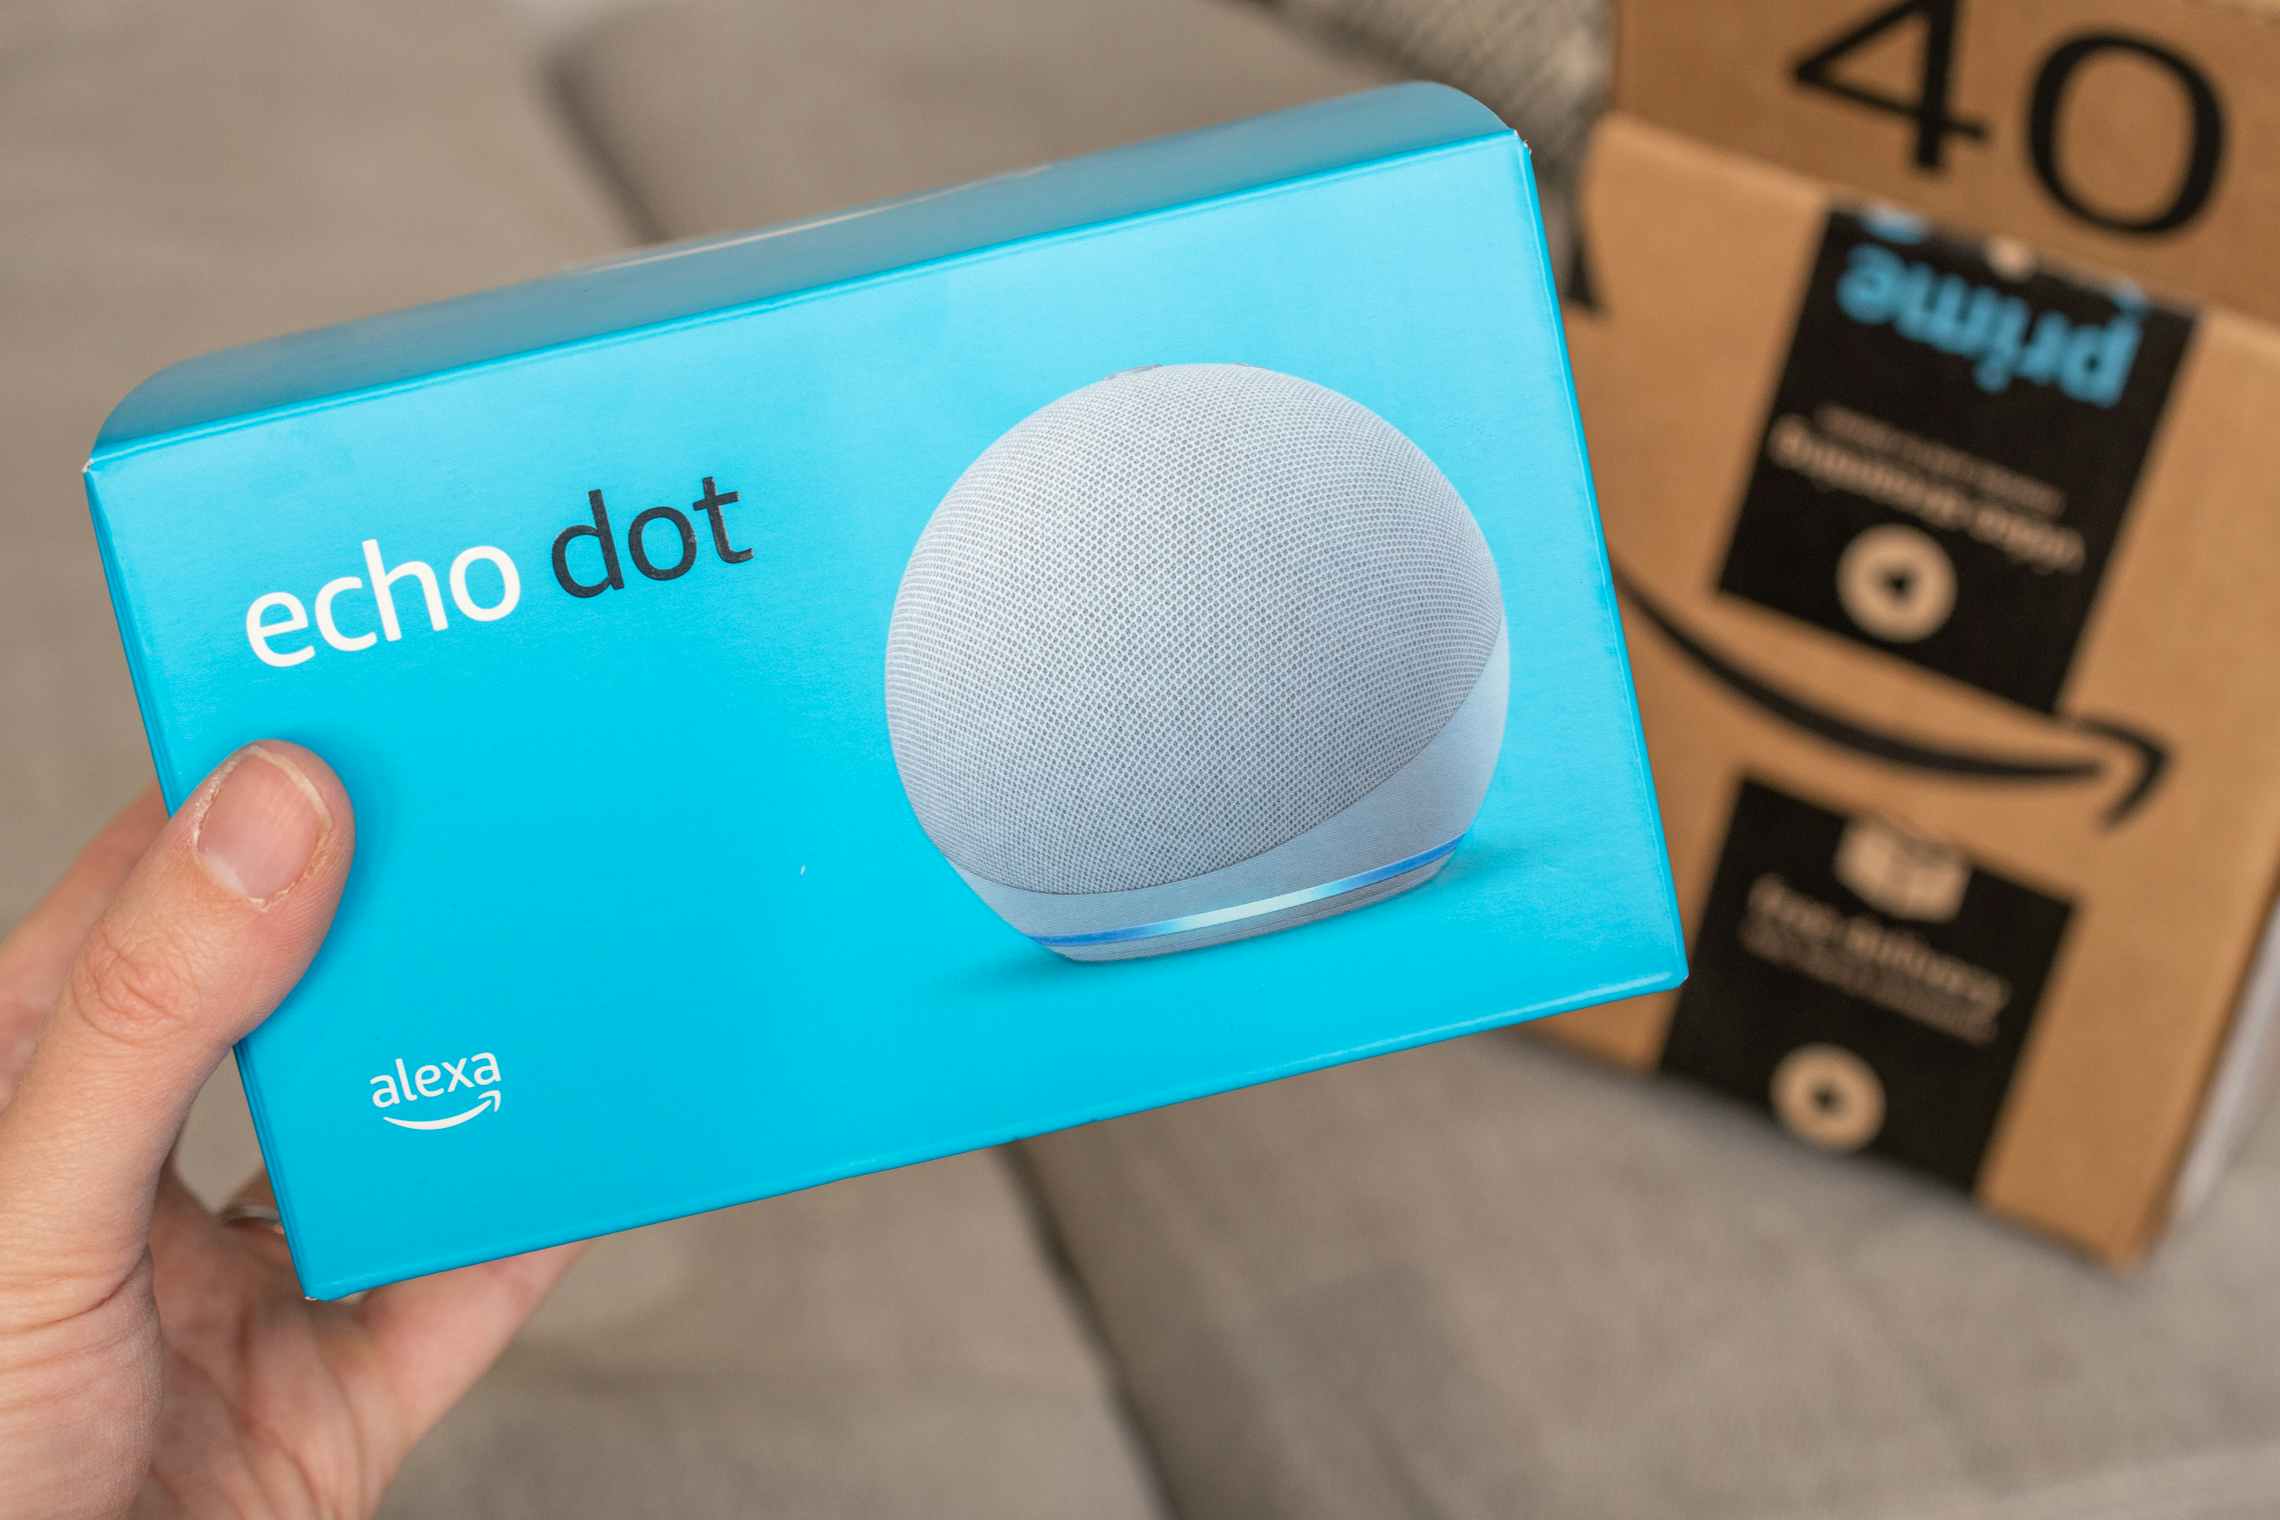 a person's handing holding up an Amazon Echo Dot in front of an Amazon Prime package